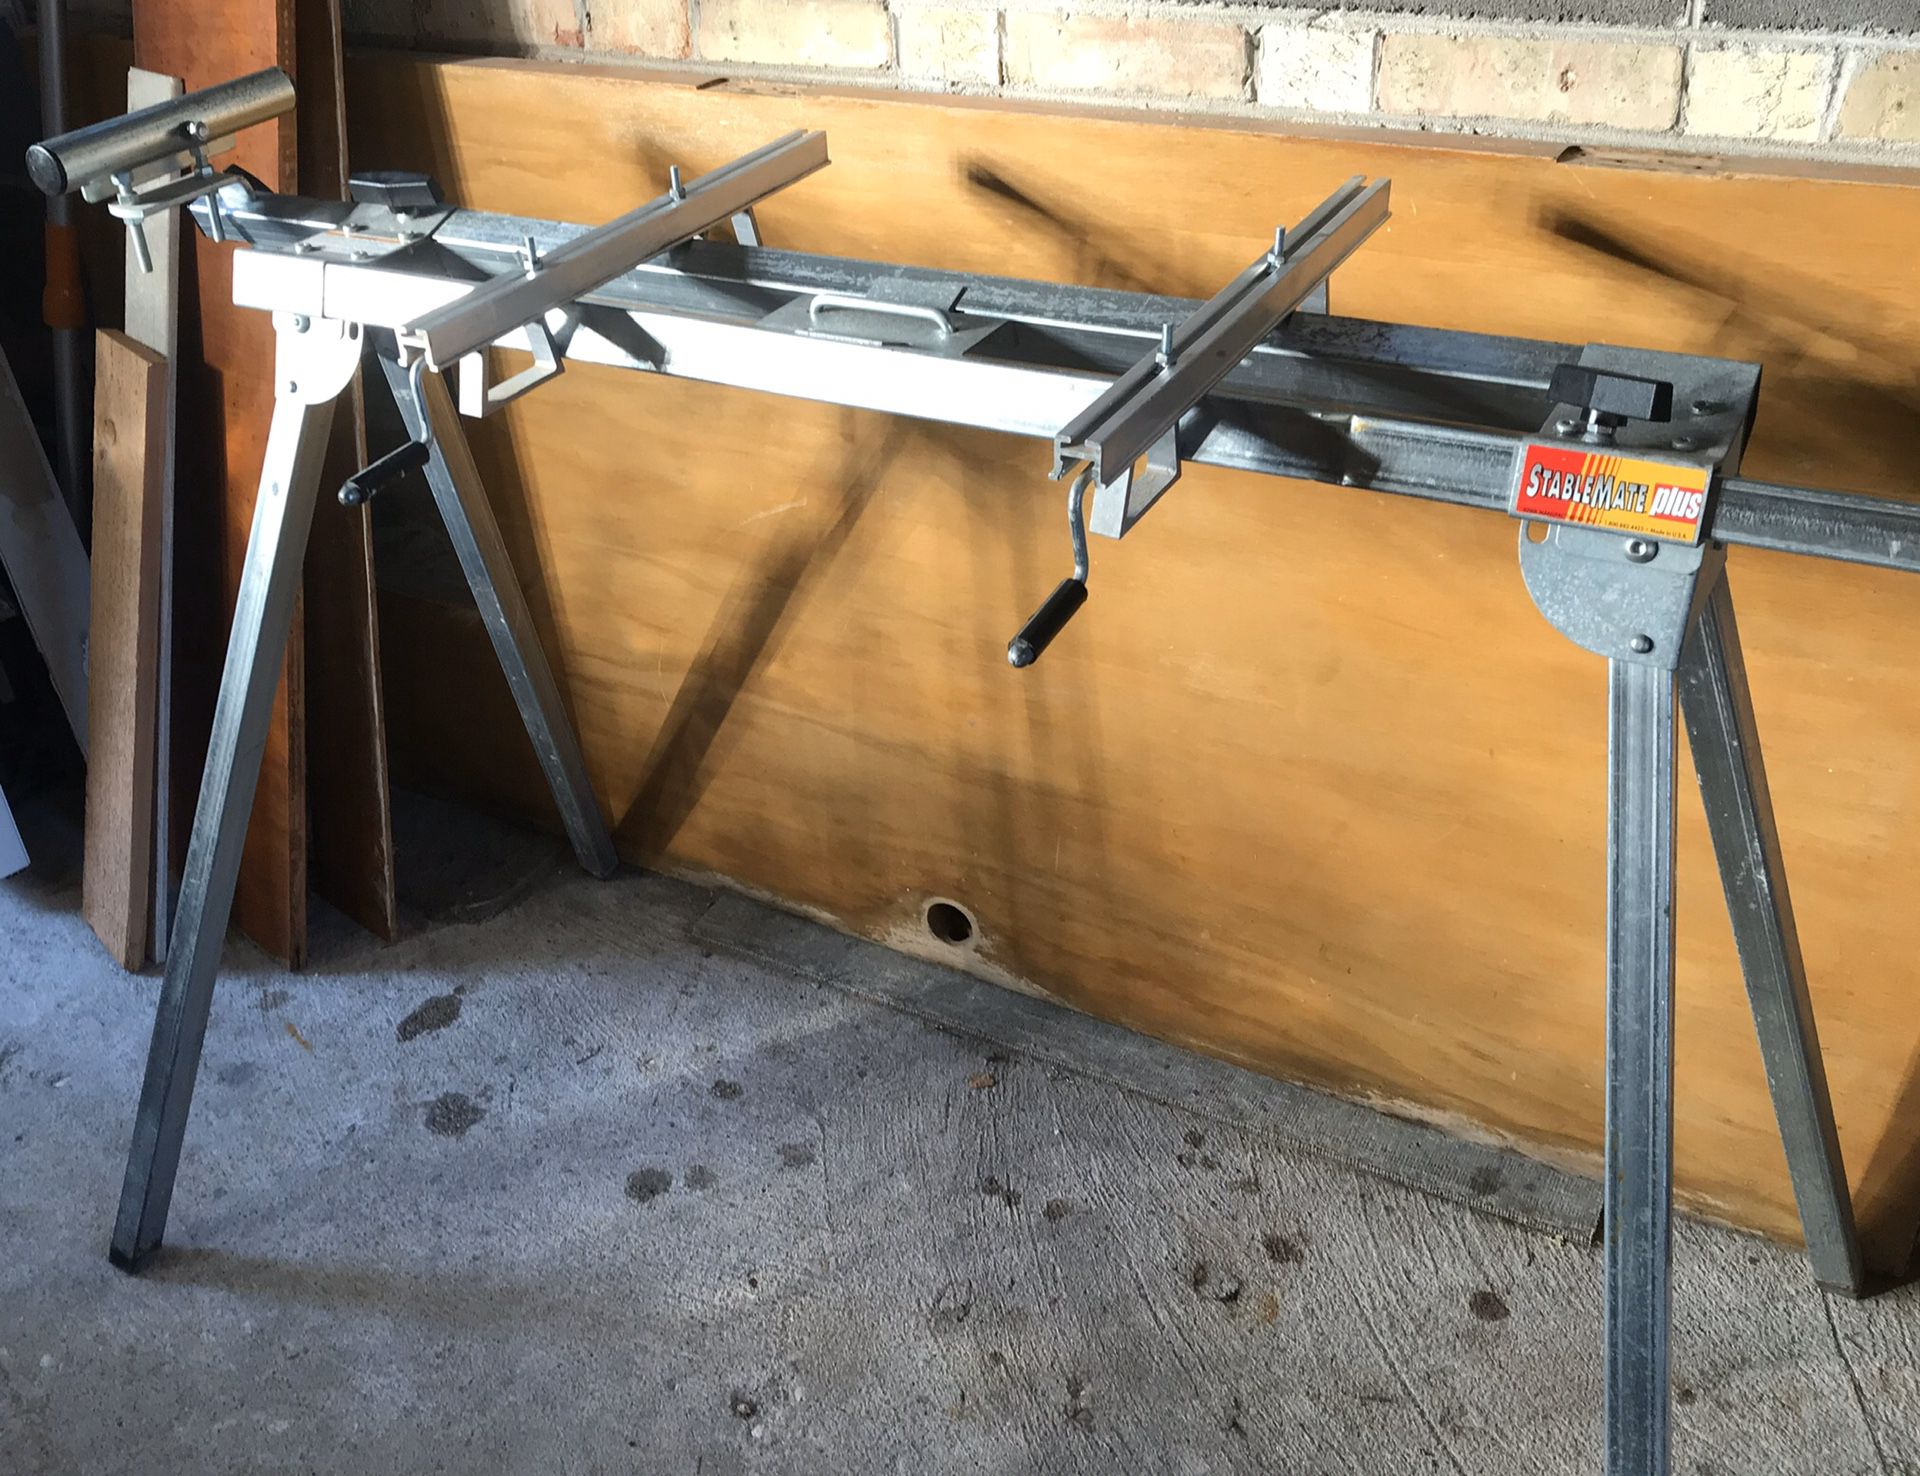 Stablemate Plus Universal Miter Saw Stand/Table